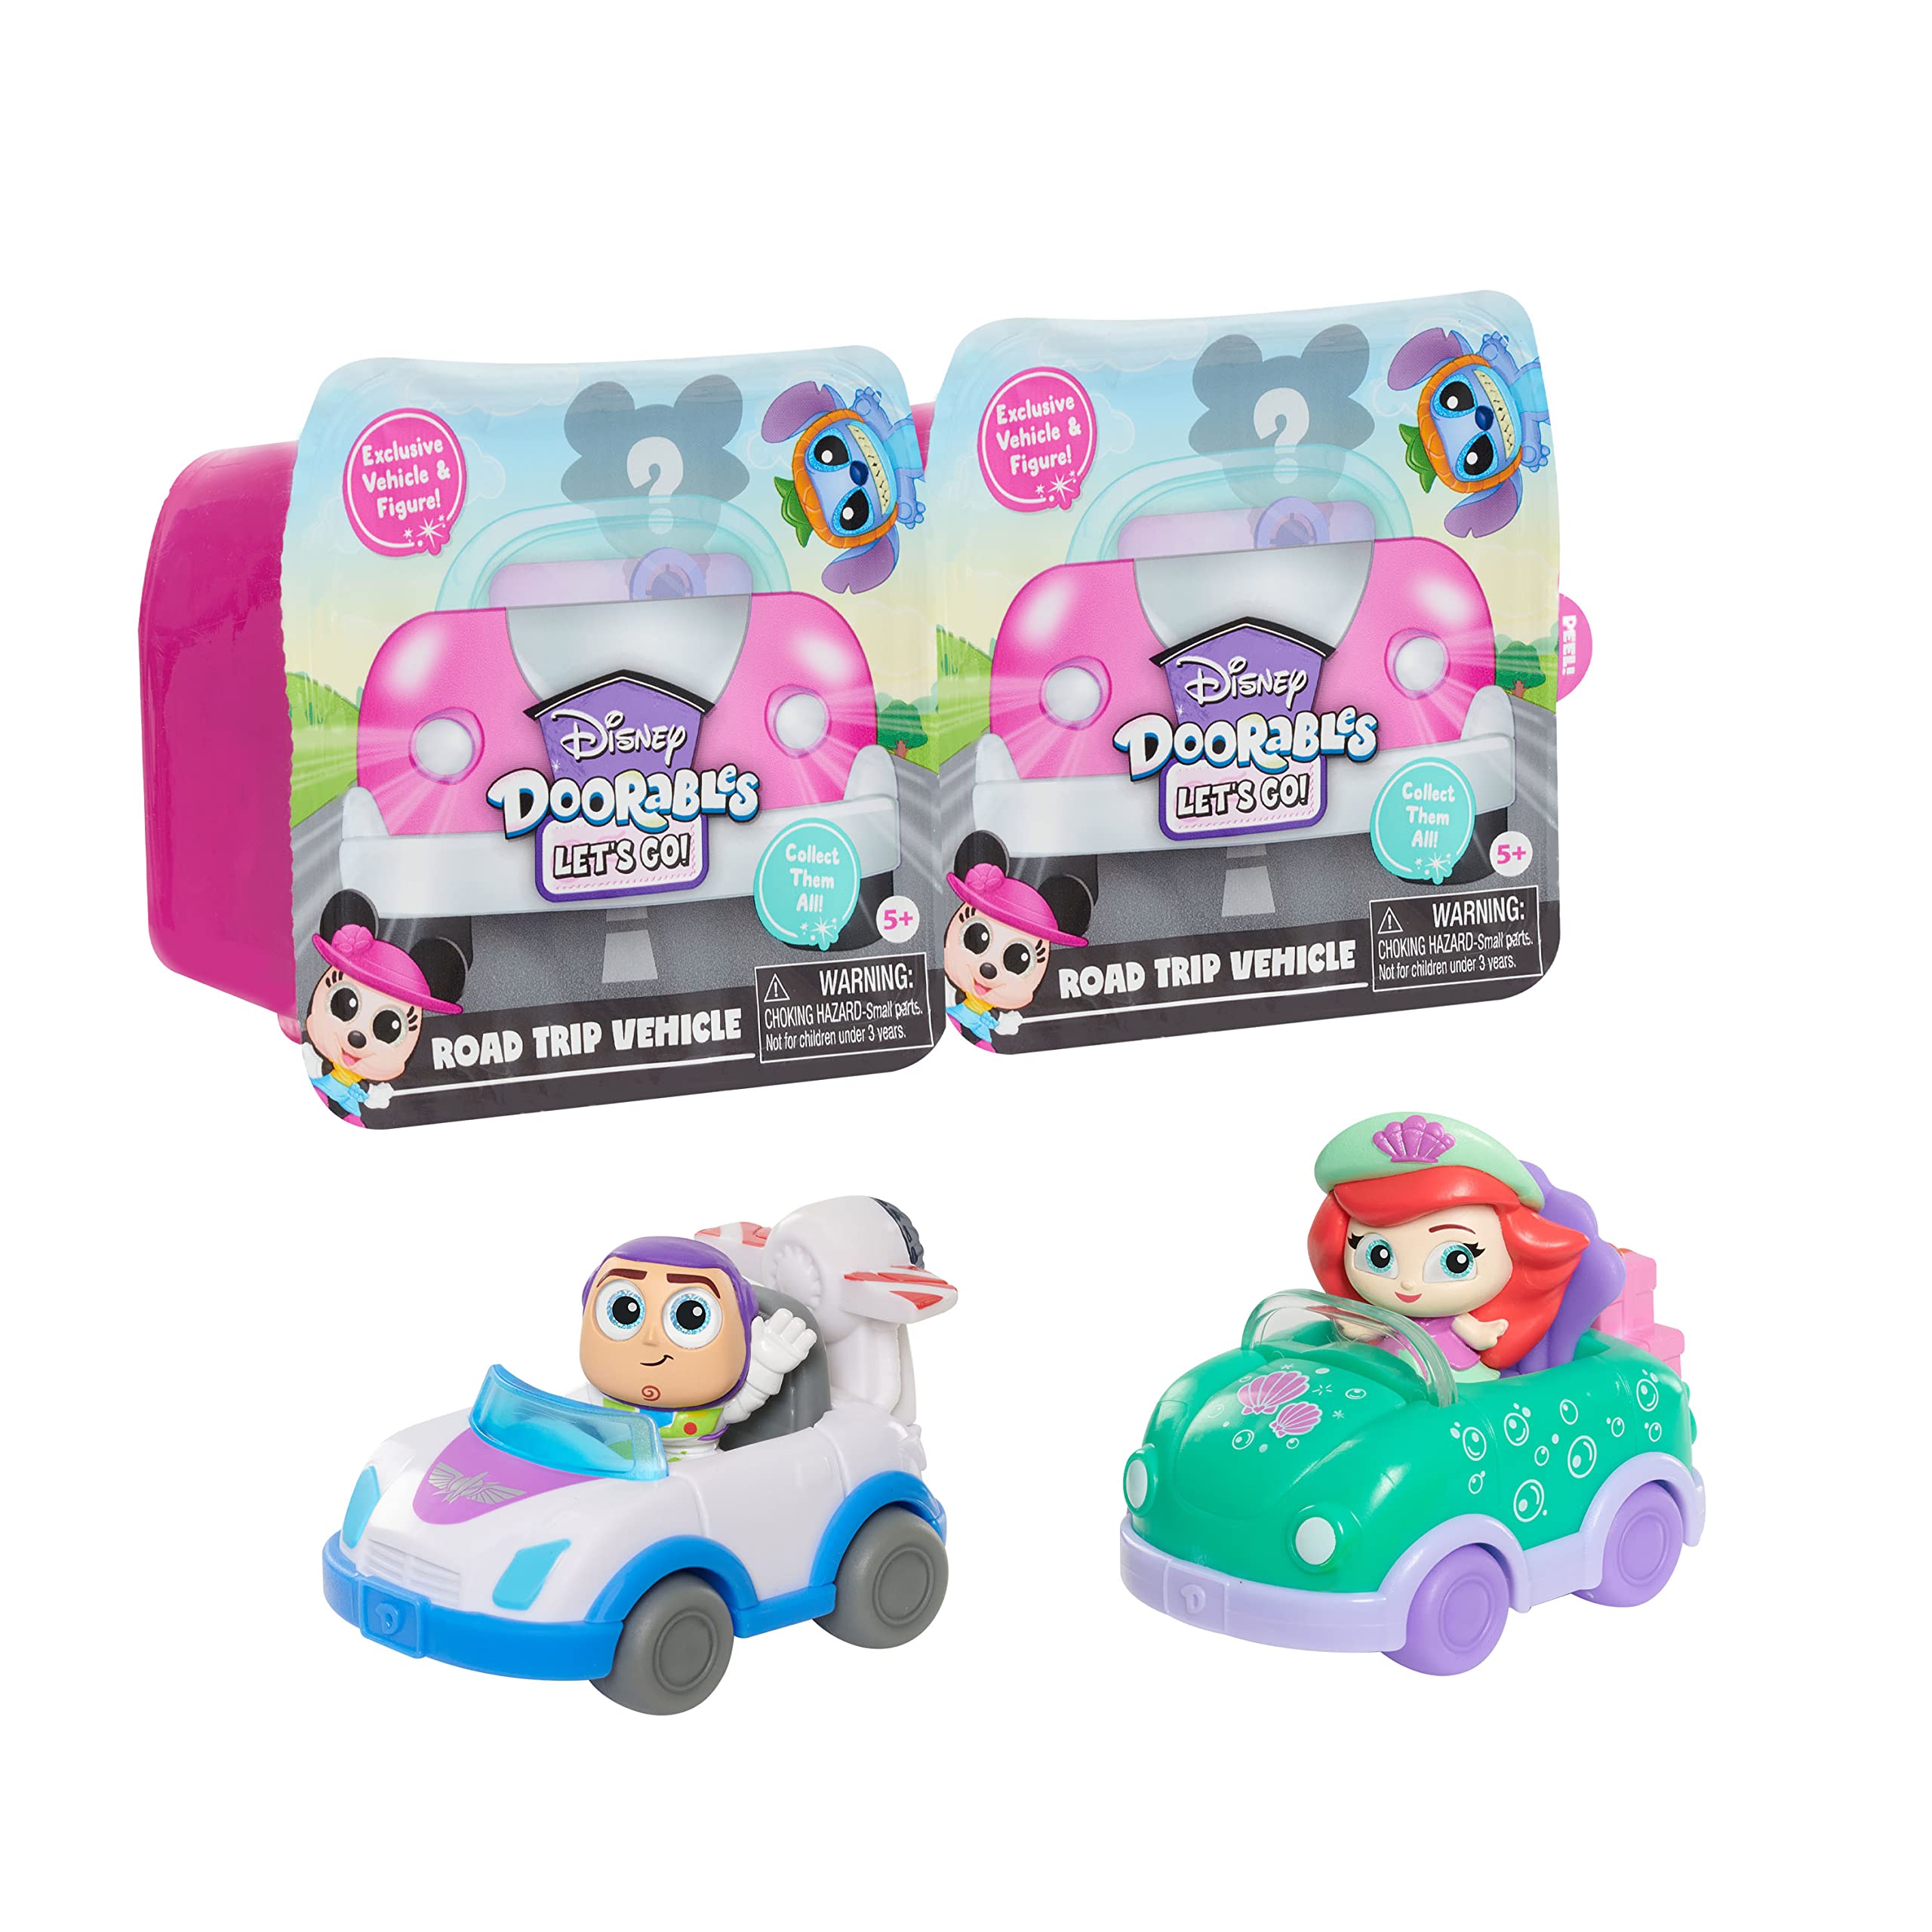 Disney Doorables Let’s Go Vehicles 2-Pack Series 1, Basket Stuffers, Toy Figures, Officially Licensed Kids Toys for Ages 5 Up, Gifts and Presents, Amazon Exclusive